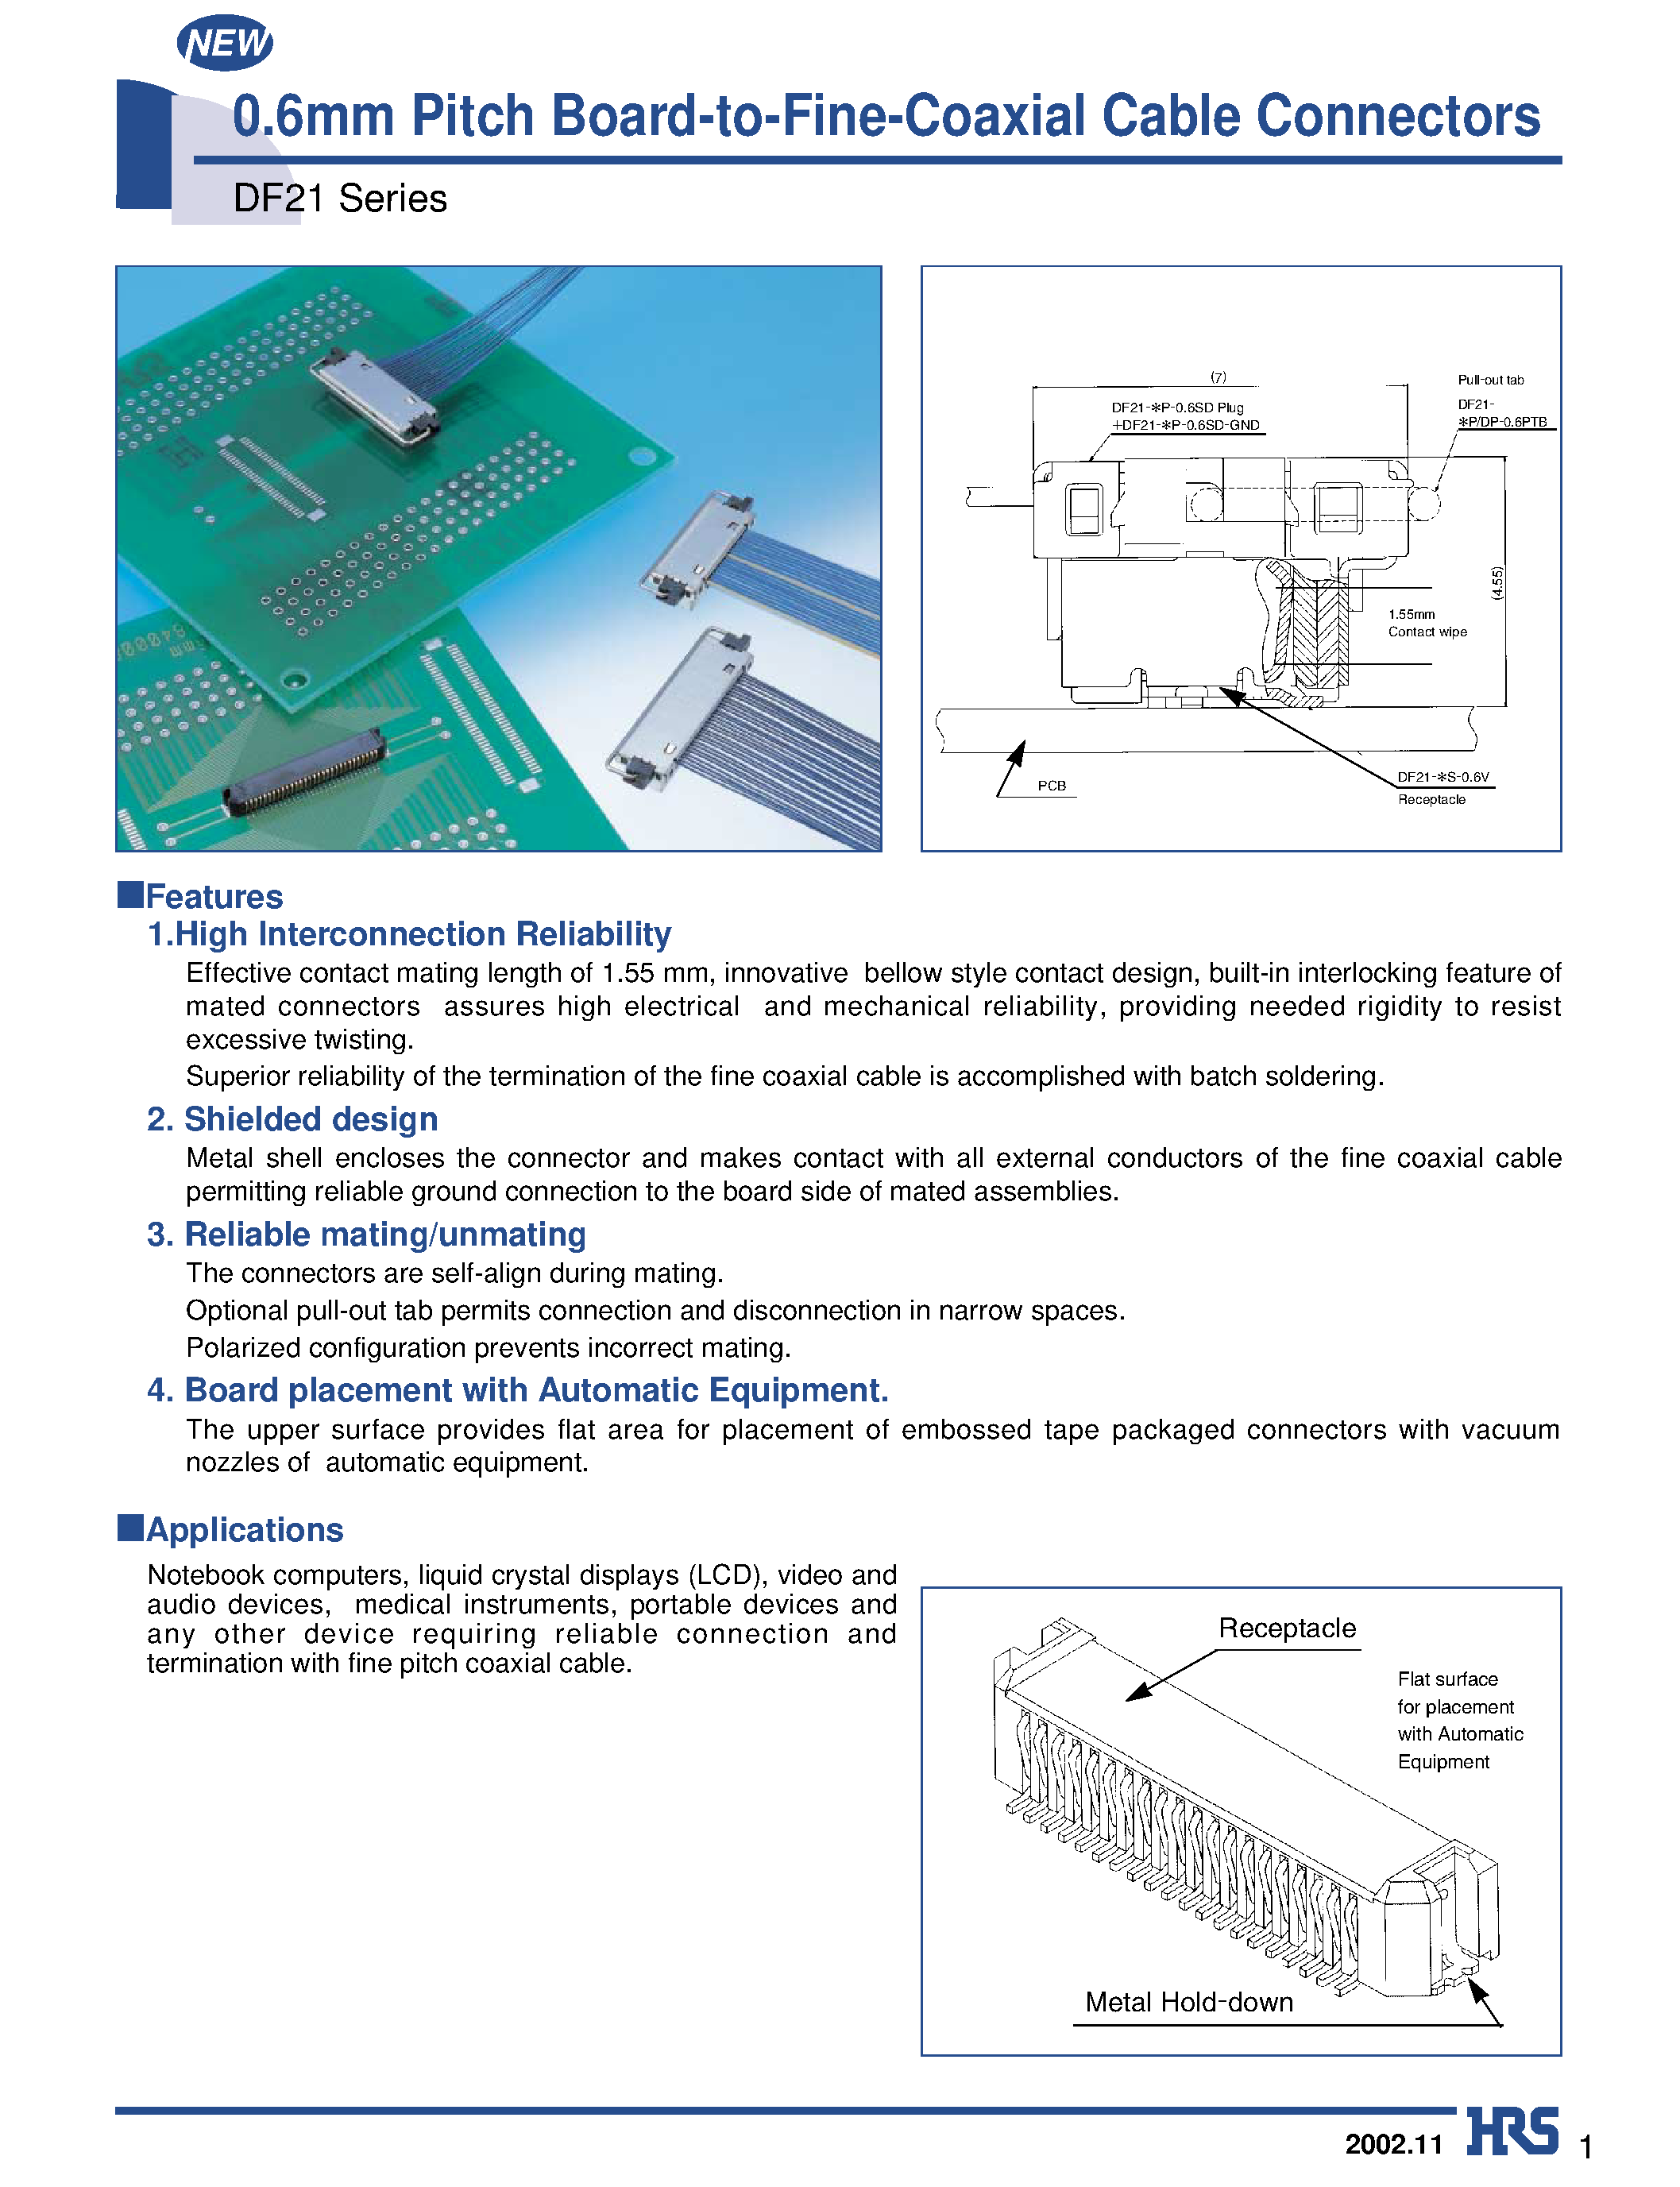 Datasheet DF21-40S-0.6V - 0.6mm Pitch Board-to-Fine-Coaxial Cable Connectors page 1